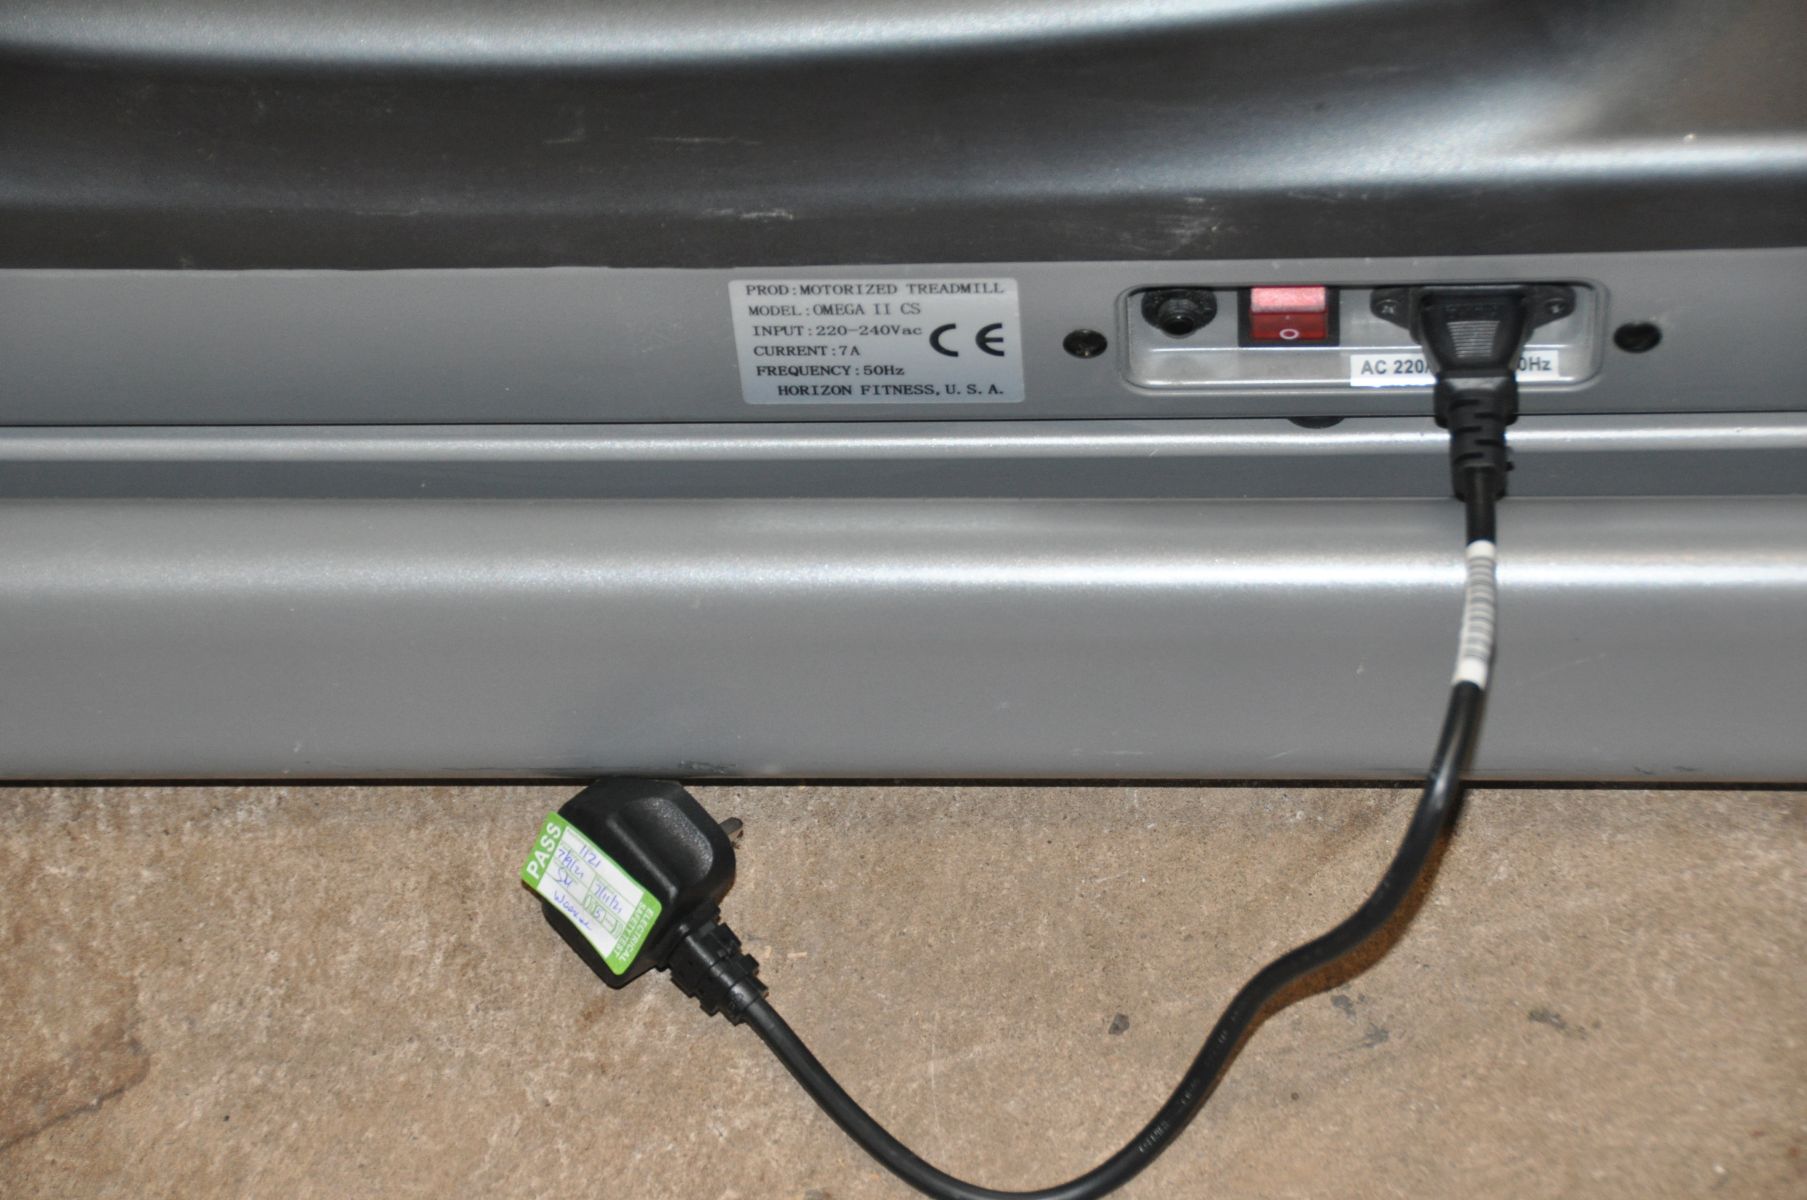 A HORIZON FITNESS OMEGA 2 CS TREADMILL with short power cable and Deadmans switch ( PAT pass and - Image 3 of 4